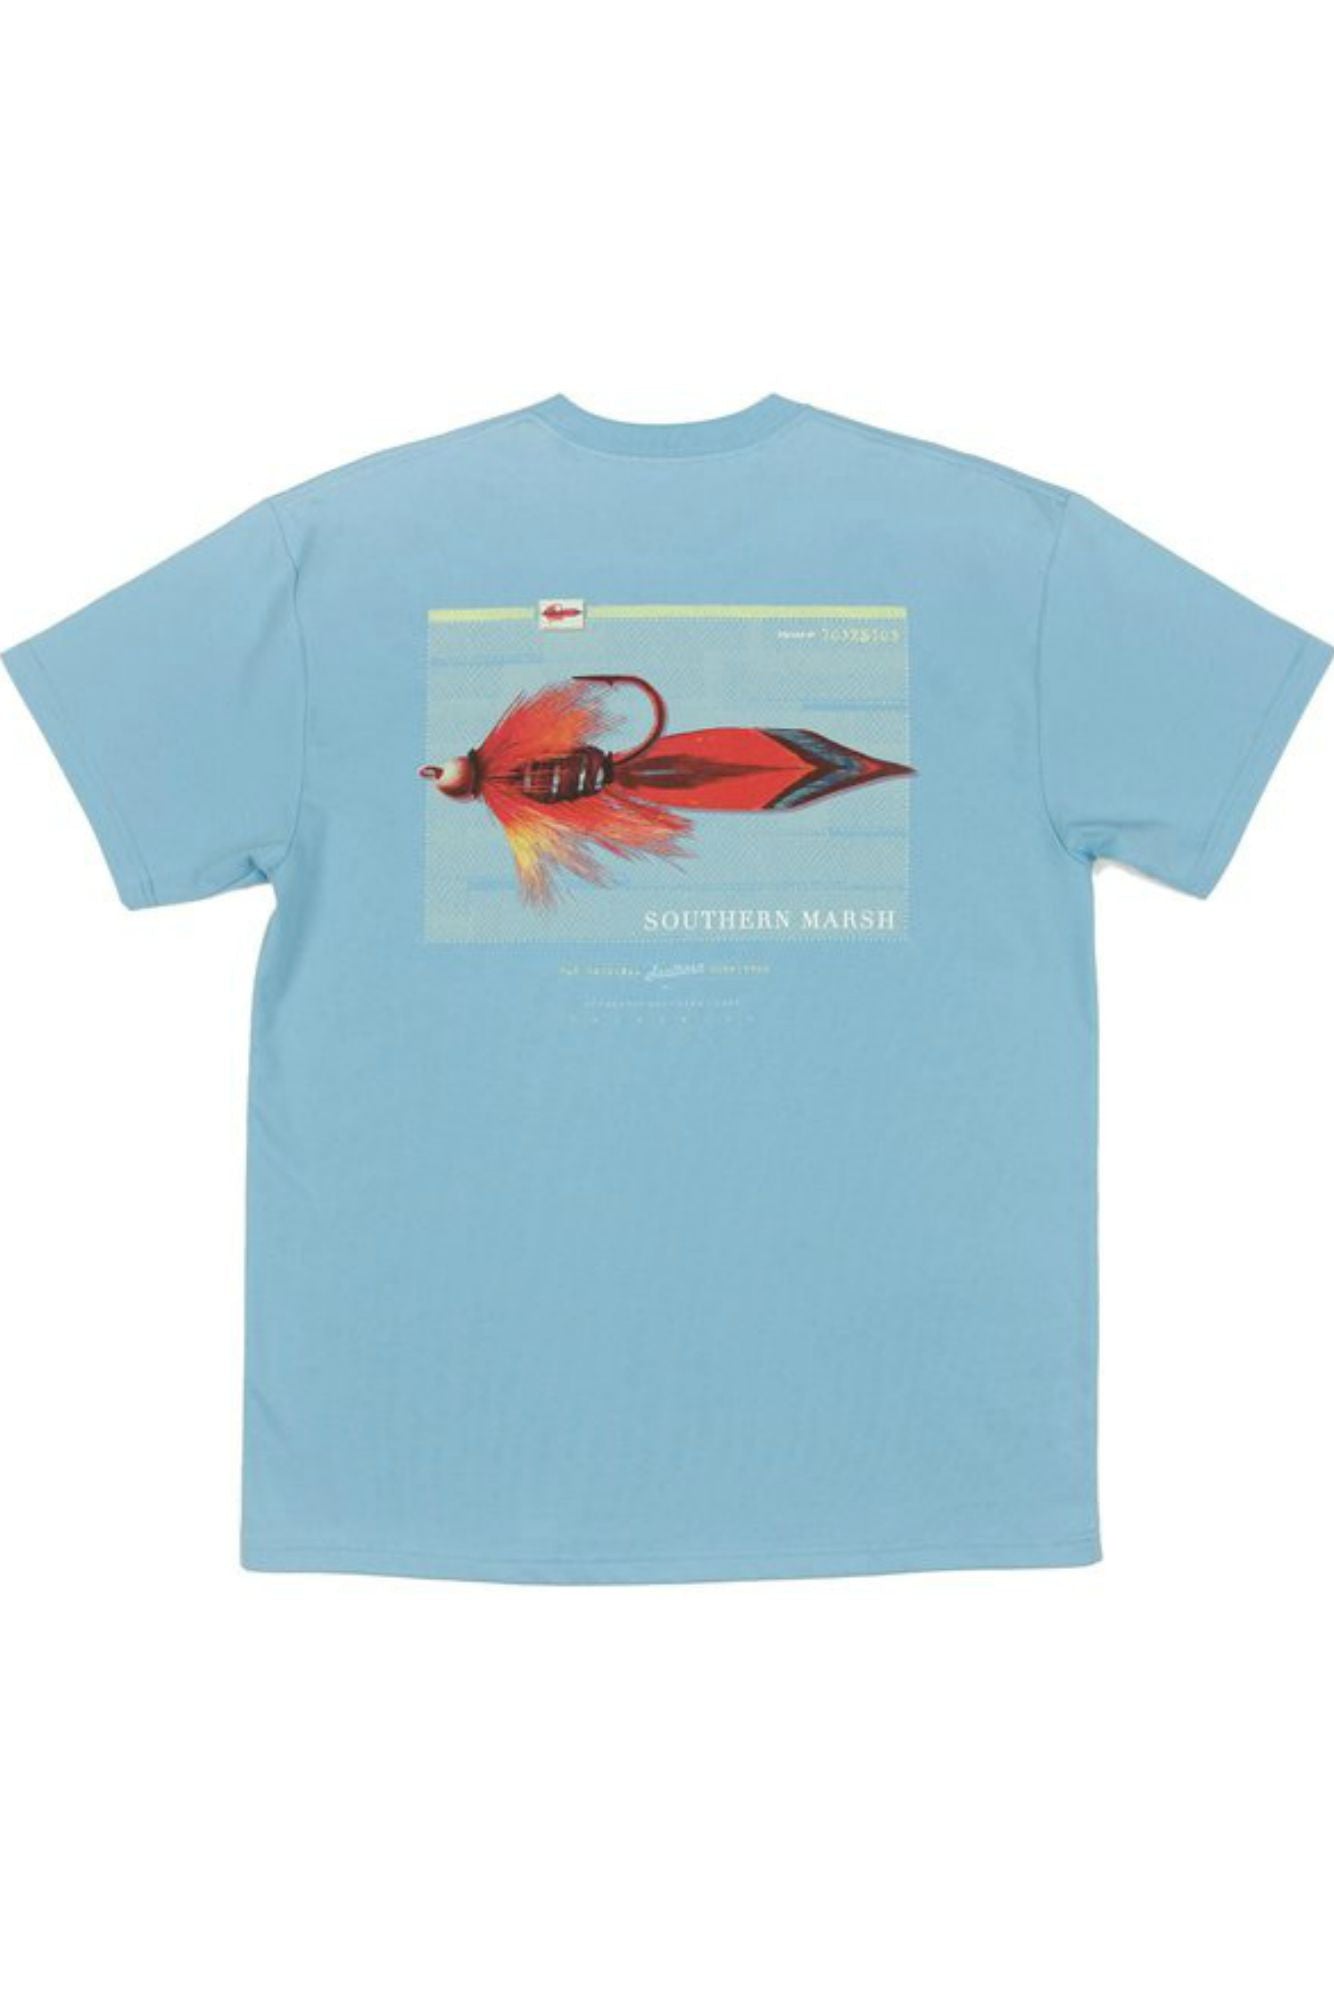 Southern Marsh: Outfitter Collection Three, Breaker Blue